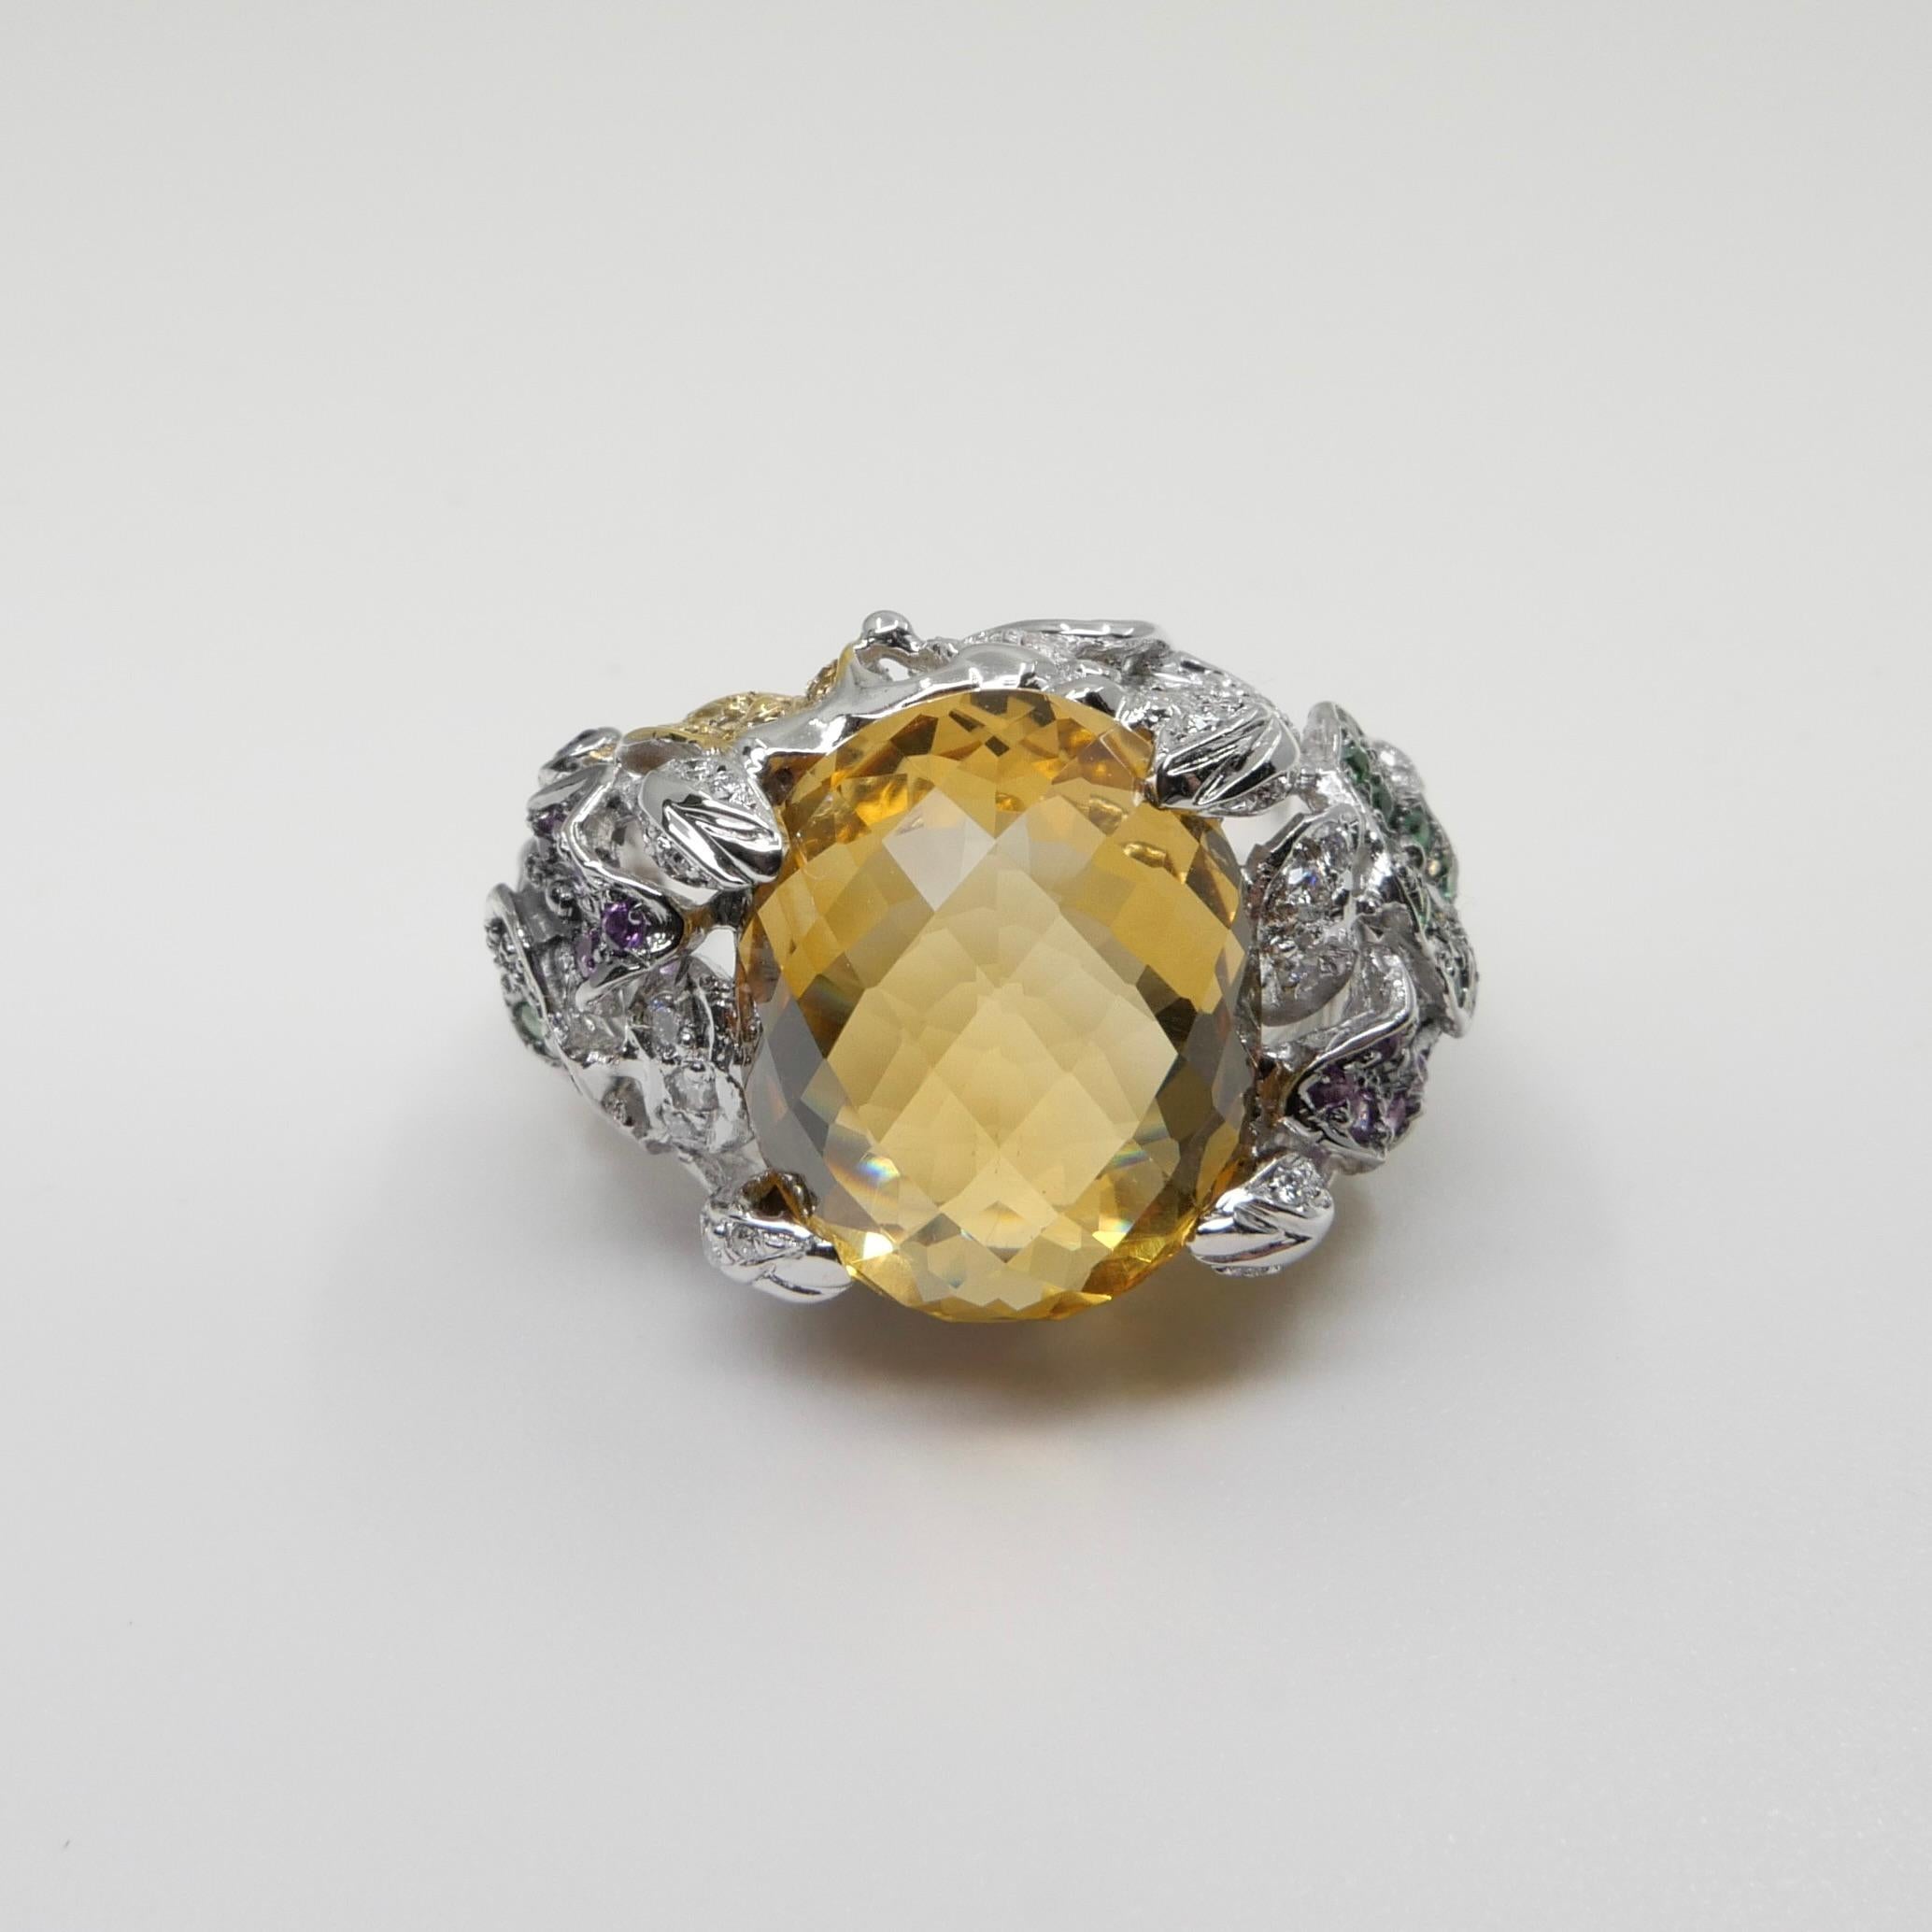 Checker Cut Yellow Topaz, Diamond & Colored Gemstones Cocktail Ring, Colorful For Sale 1